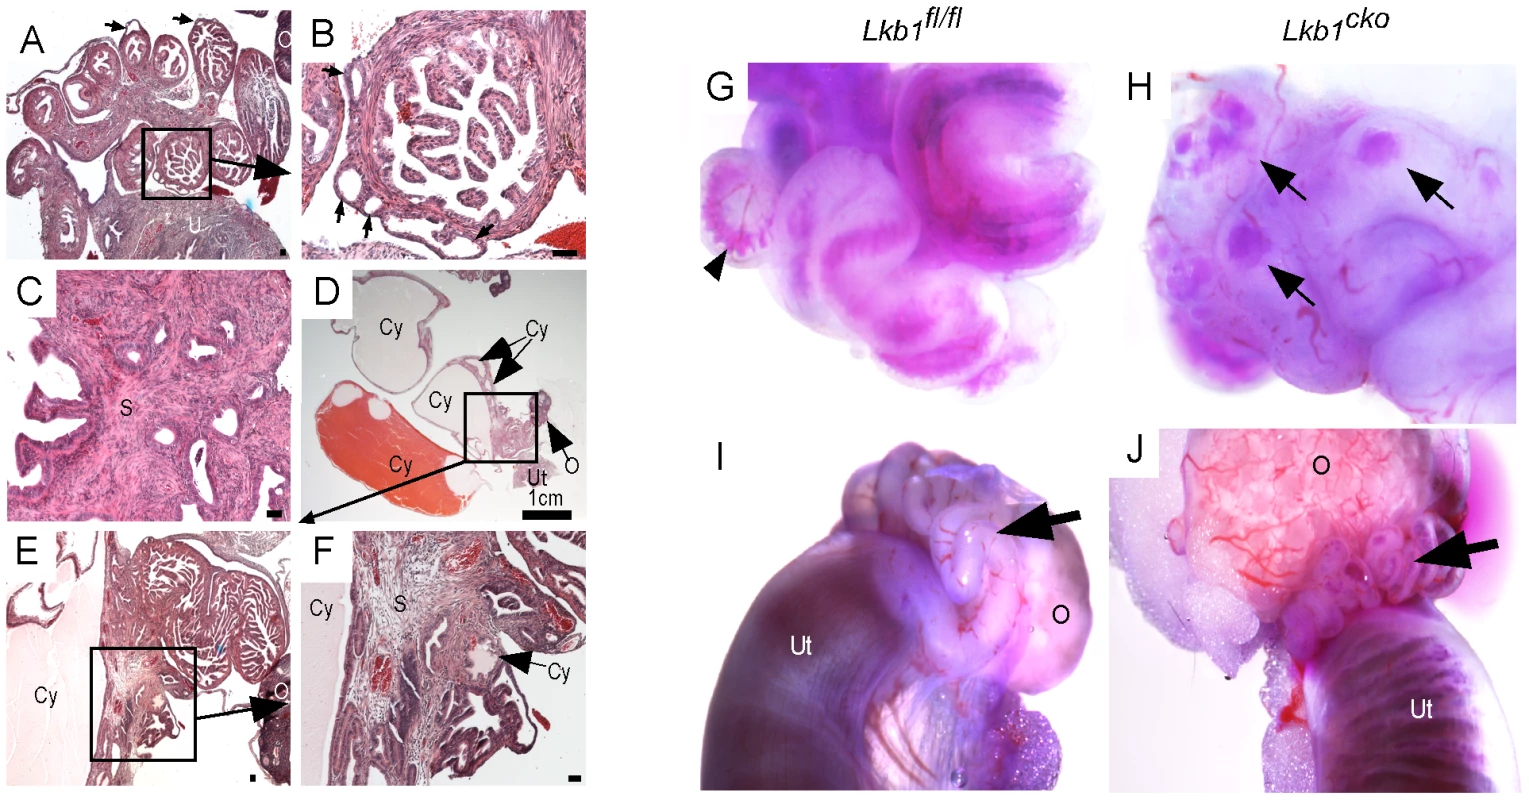 Hyperplastic and/or cystic growth in oviducts of <i>Lkb1<sup>cko</sup></i> mice.